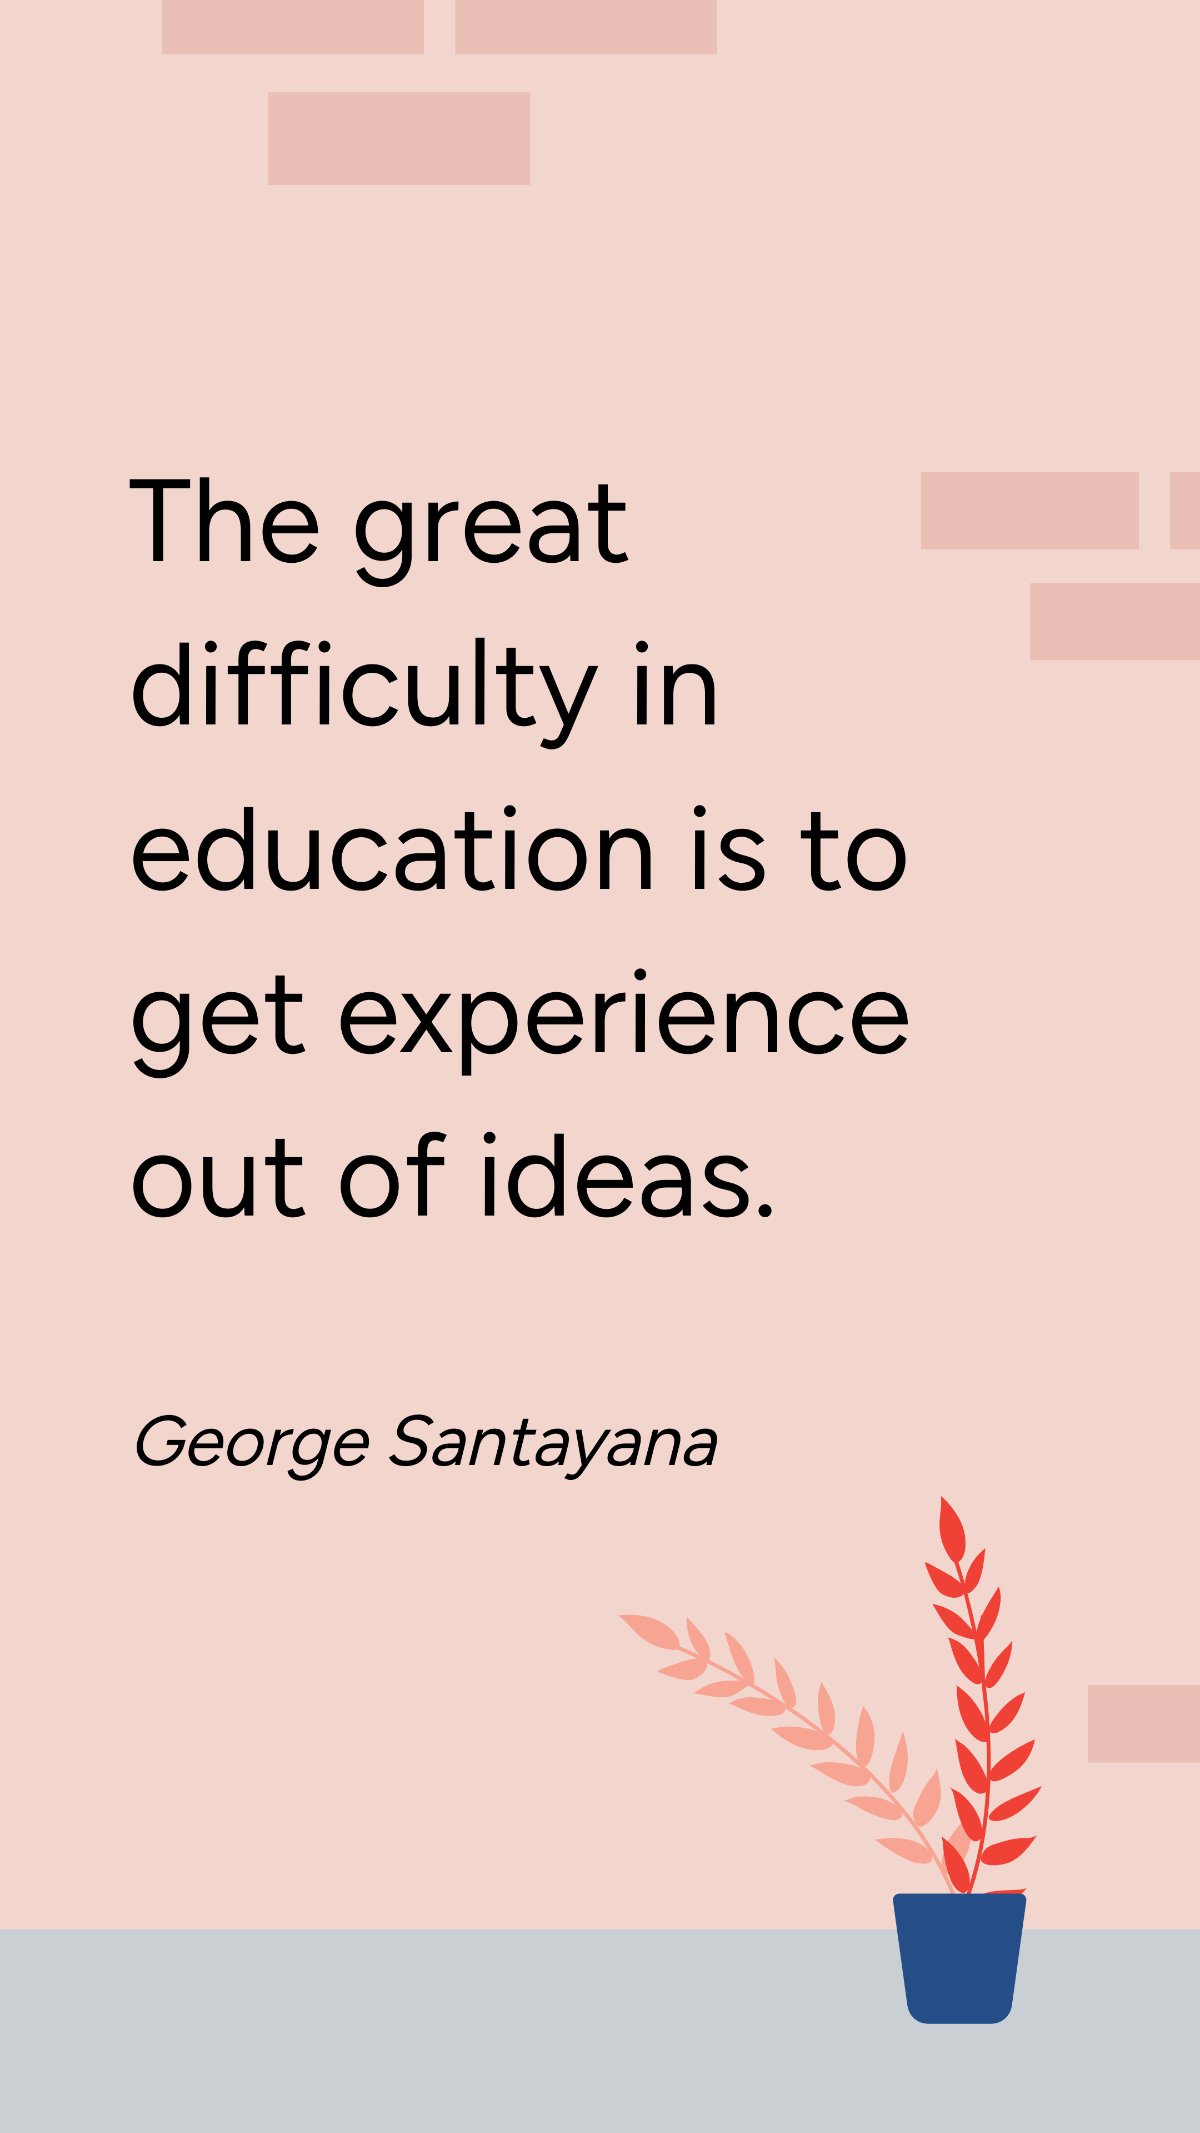 Free George Santayana - The great difficulty in education is to get experience out of ideas. Template